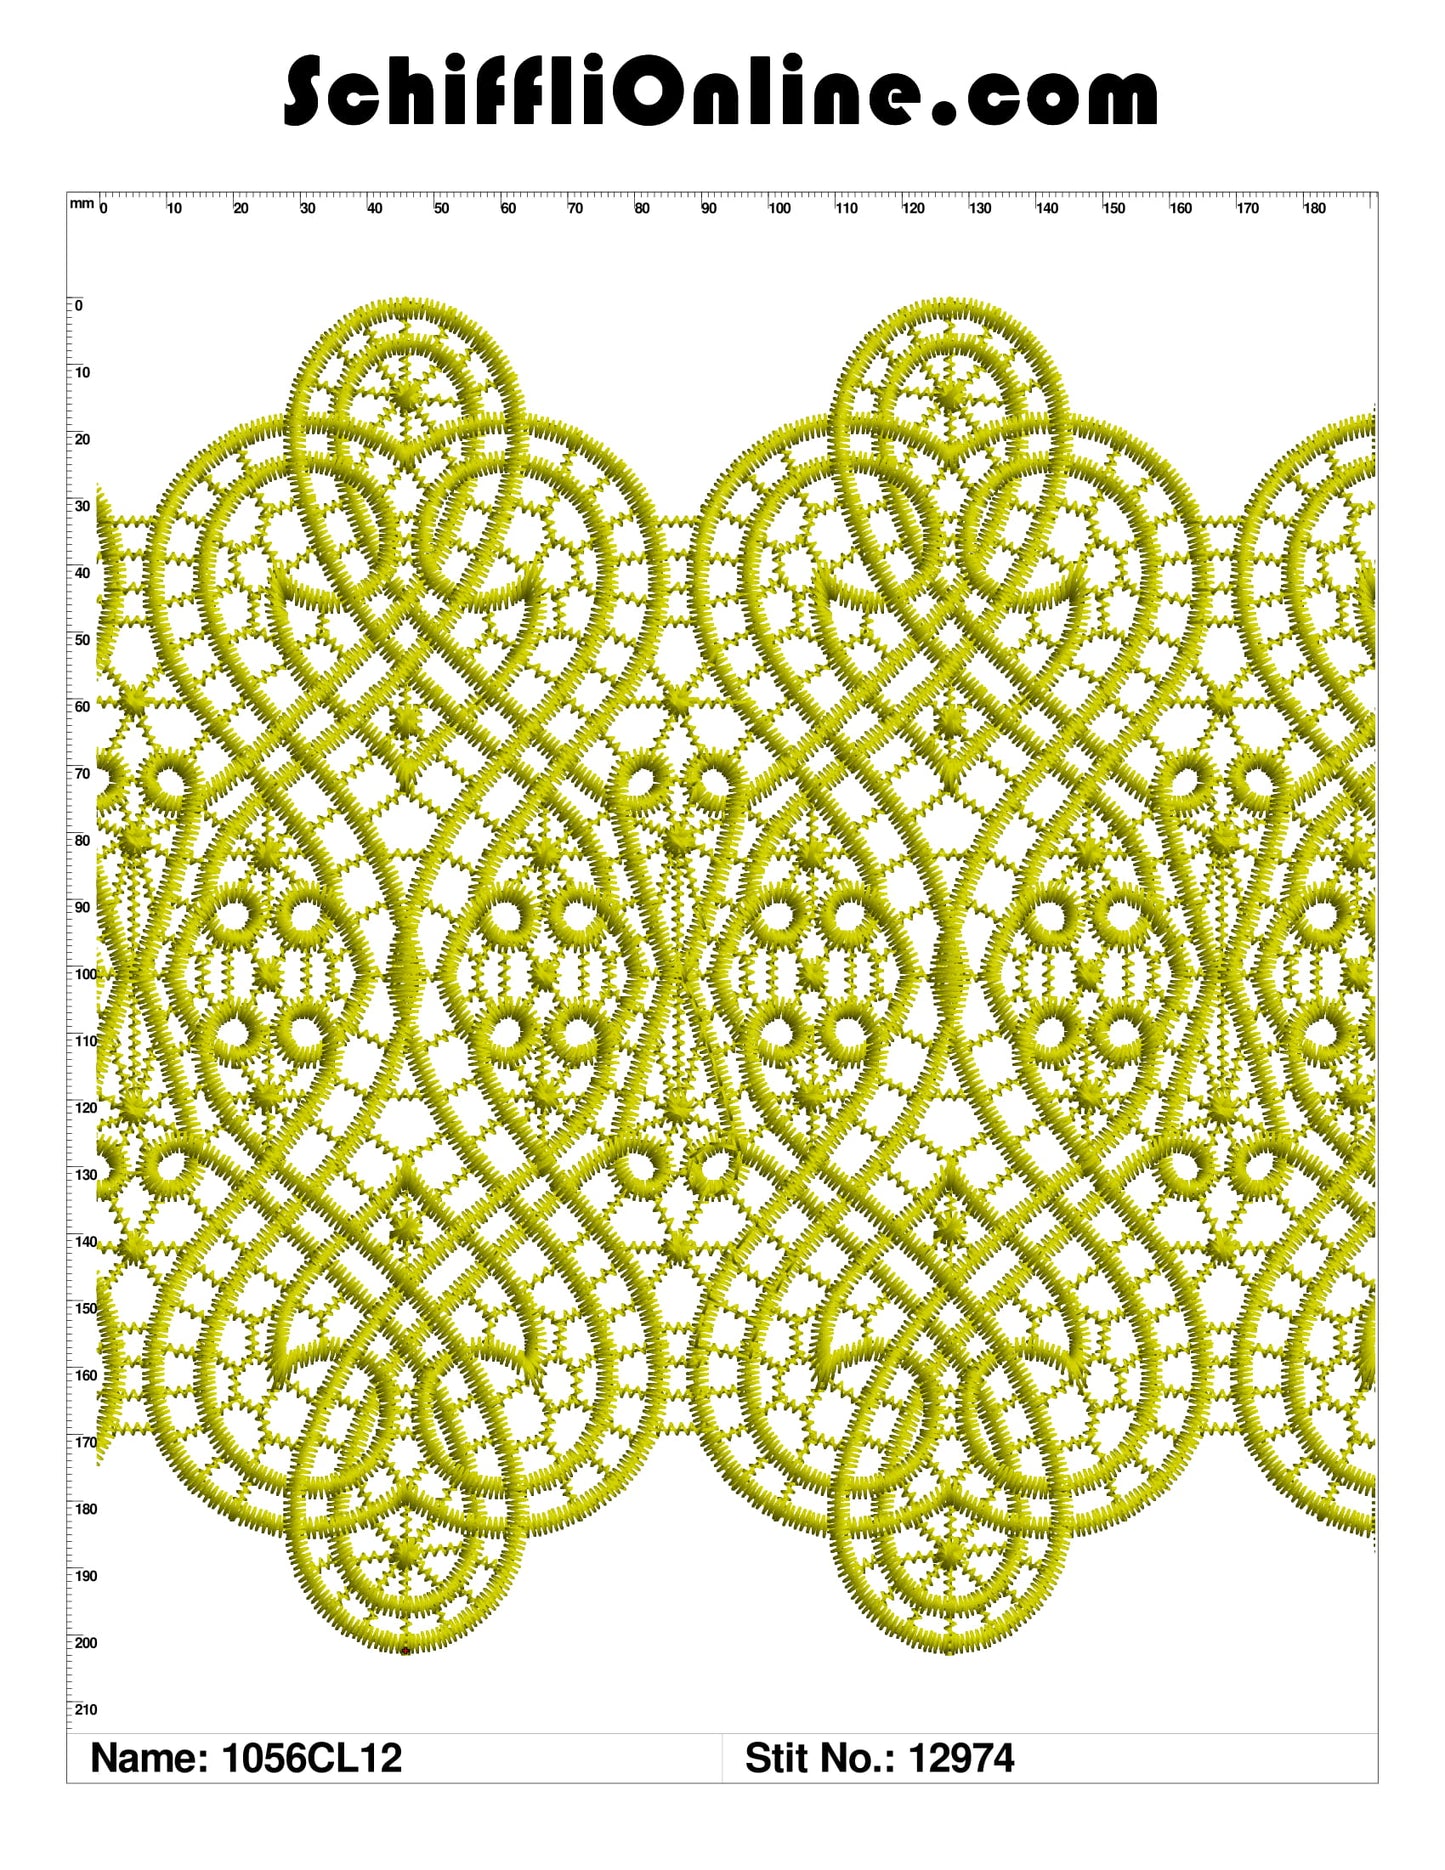 Book 147 CHEMICAL LACE 12X4 50 DESIGNS